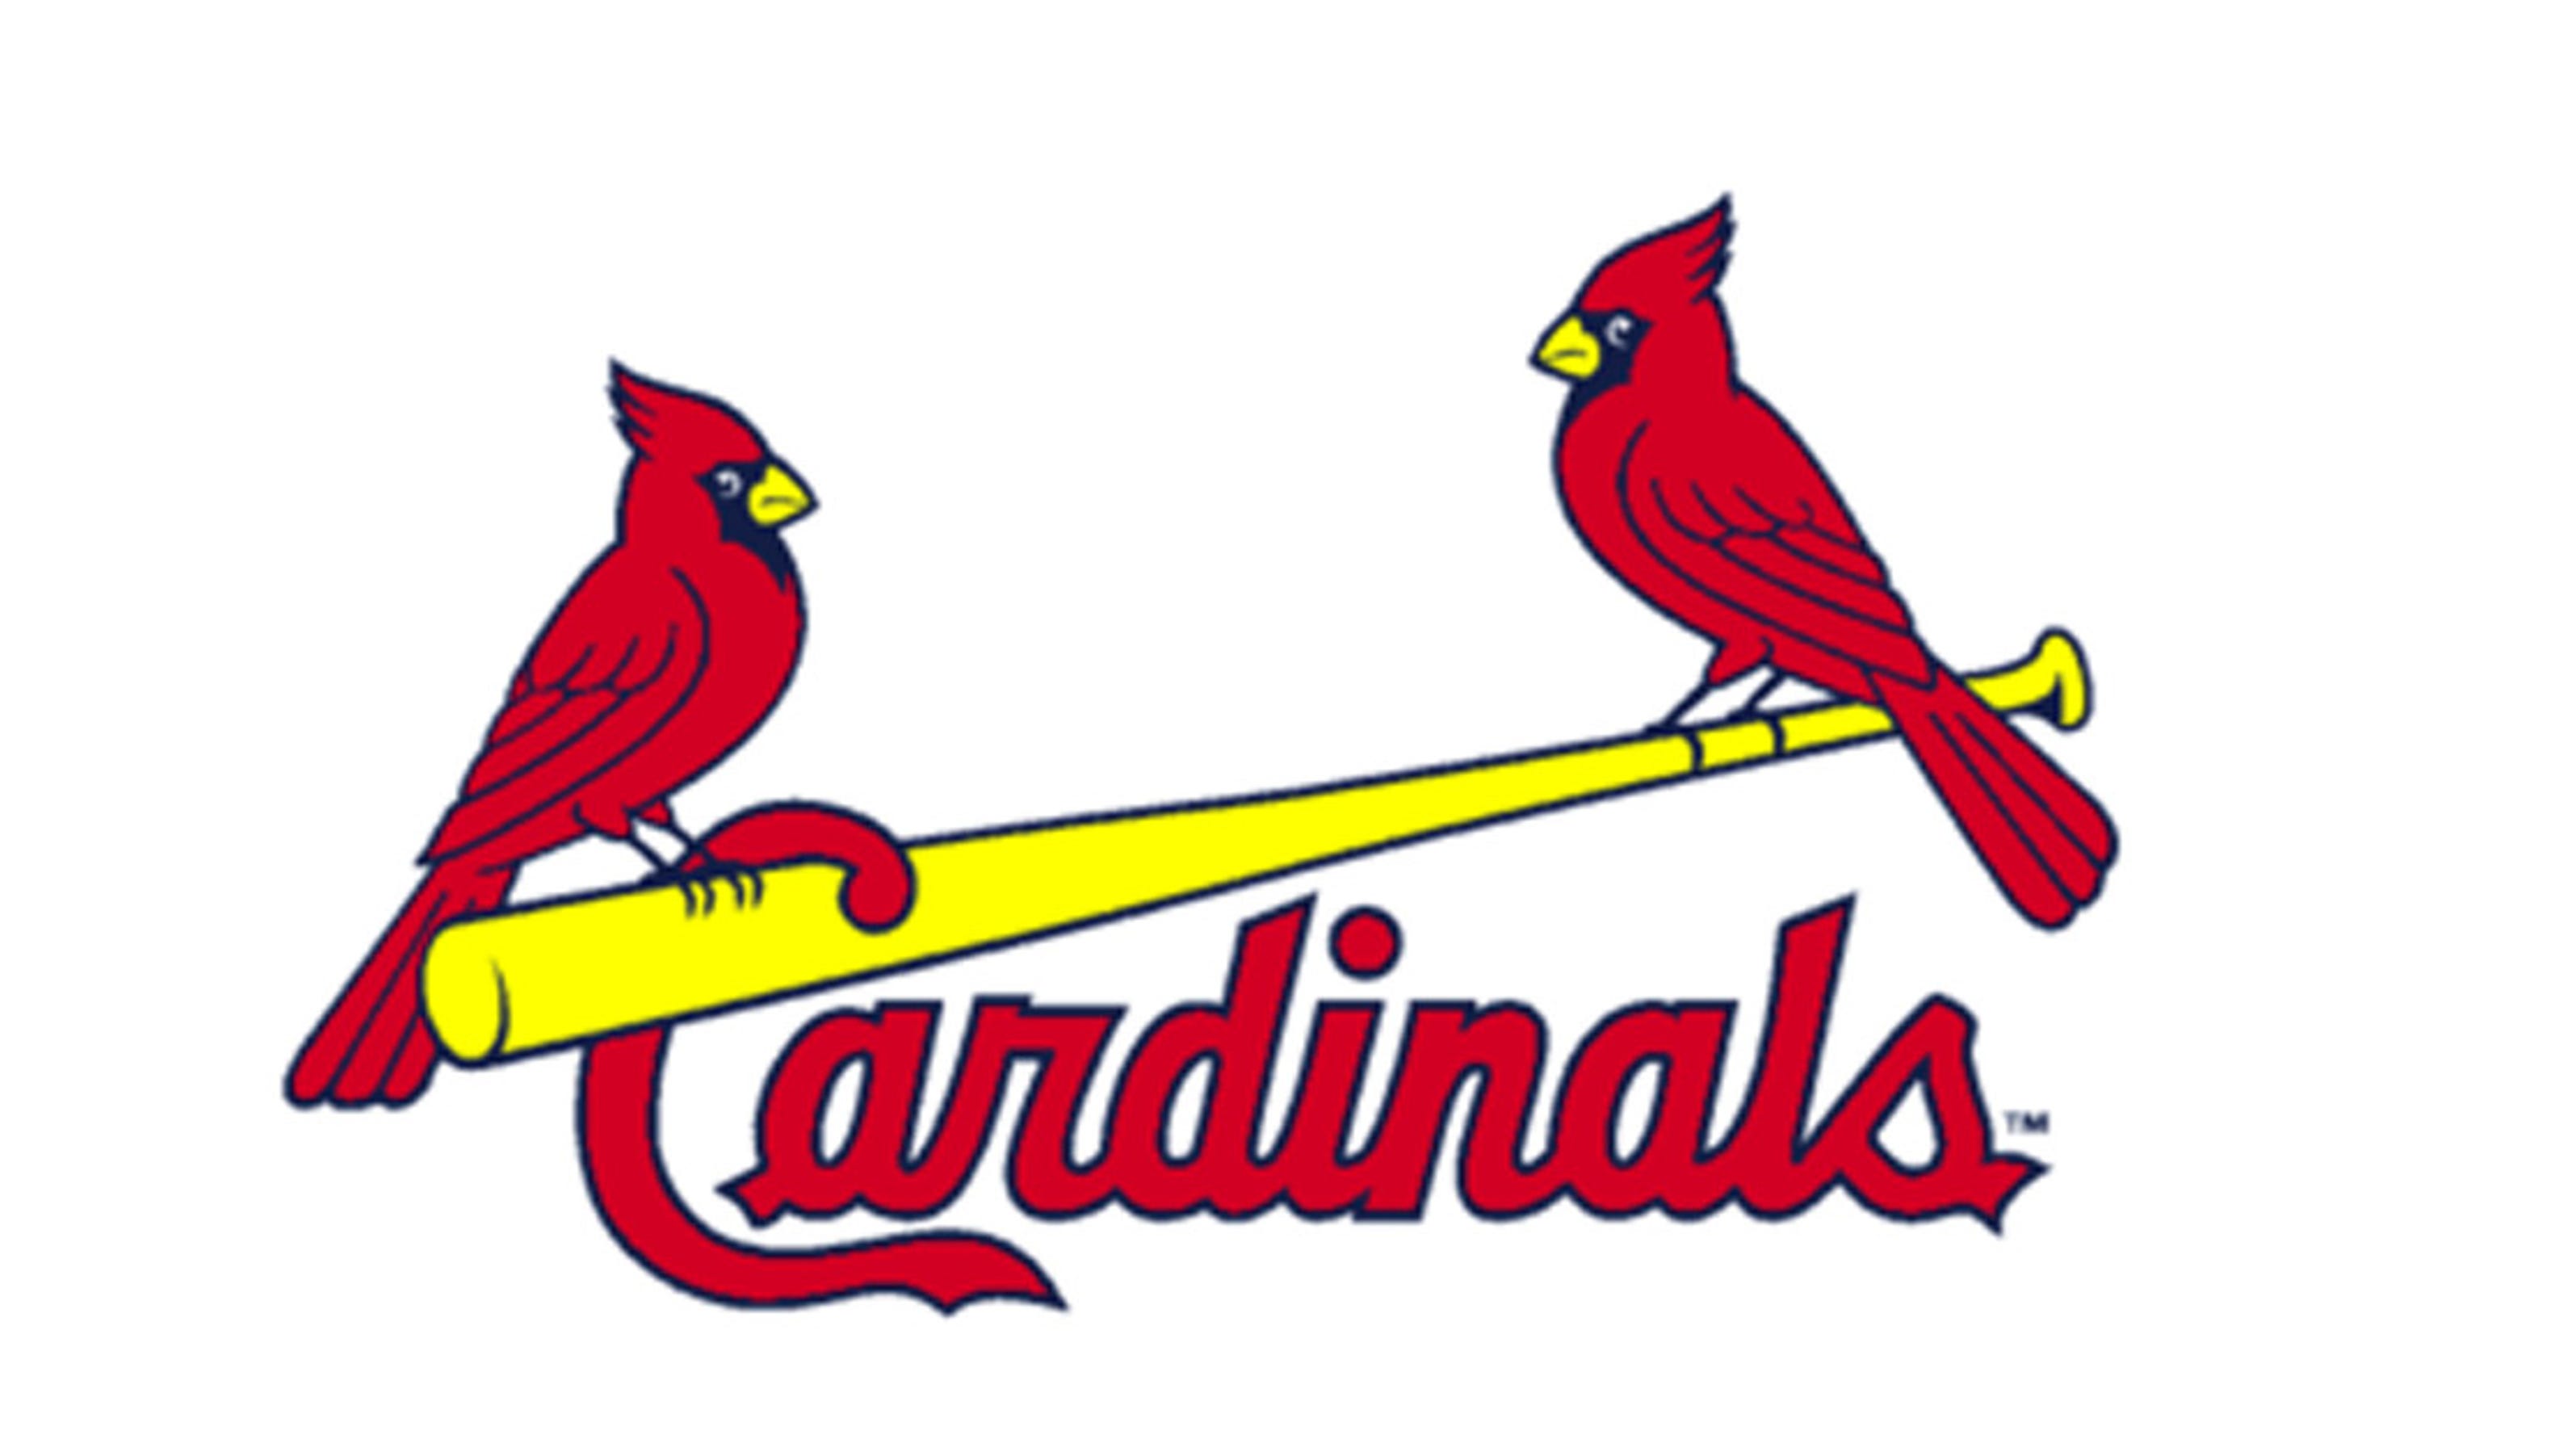 Cardinals fans get creative for NLCS